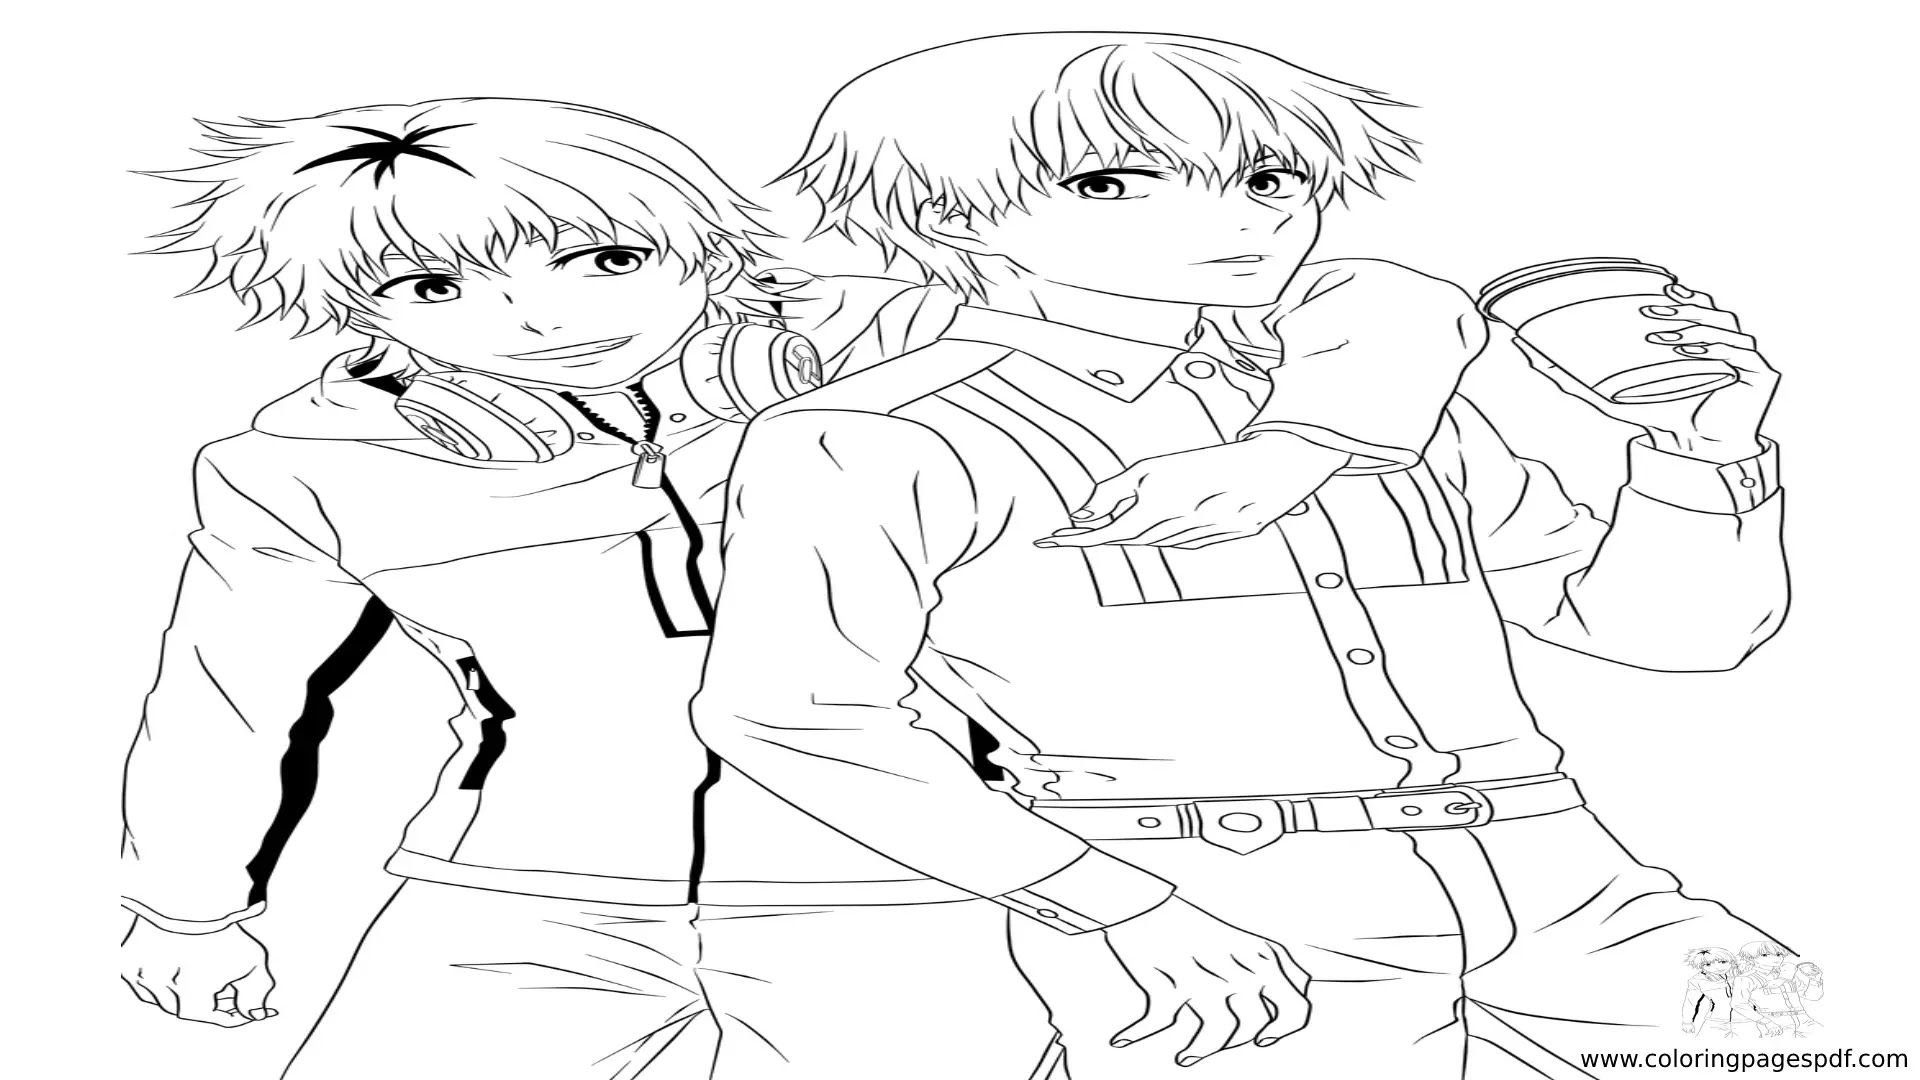 Tokyo Ghoul Anime Coloring Pages